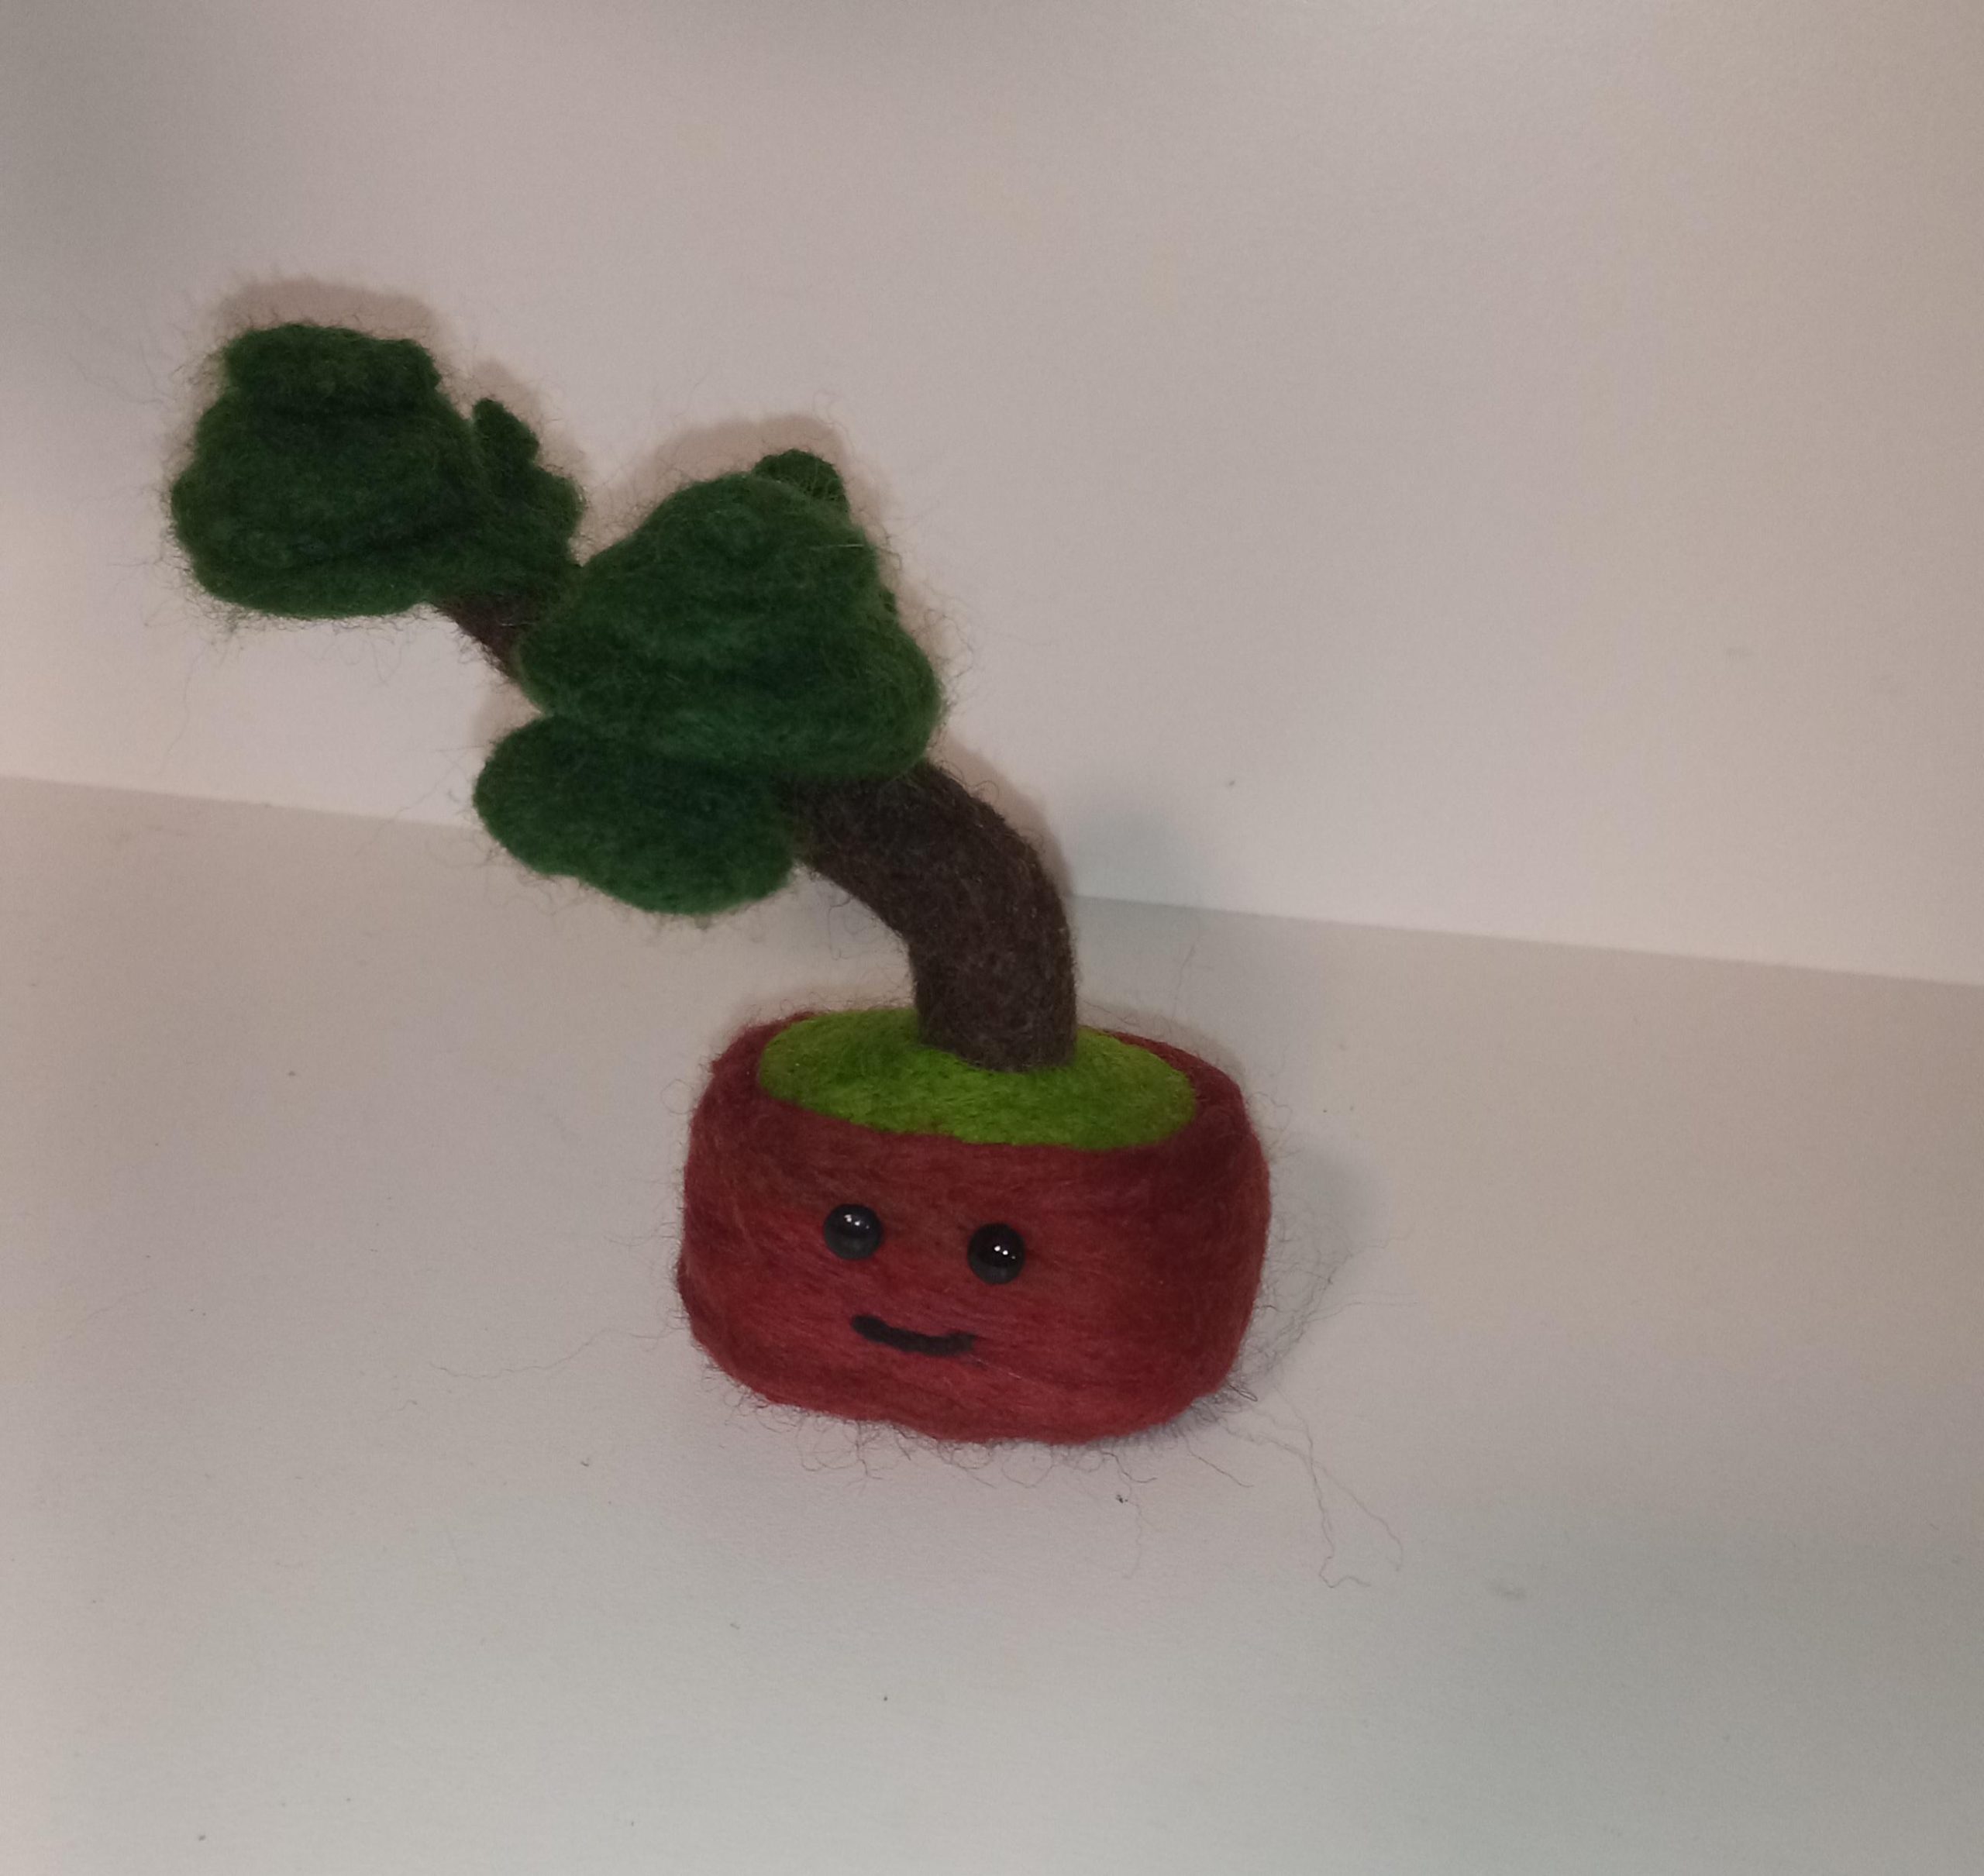 Needle felted crops for gardening day